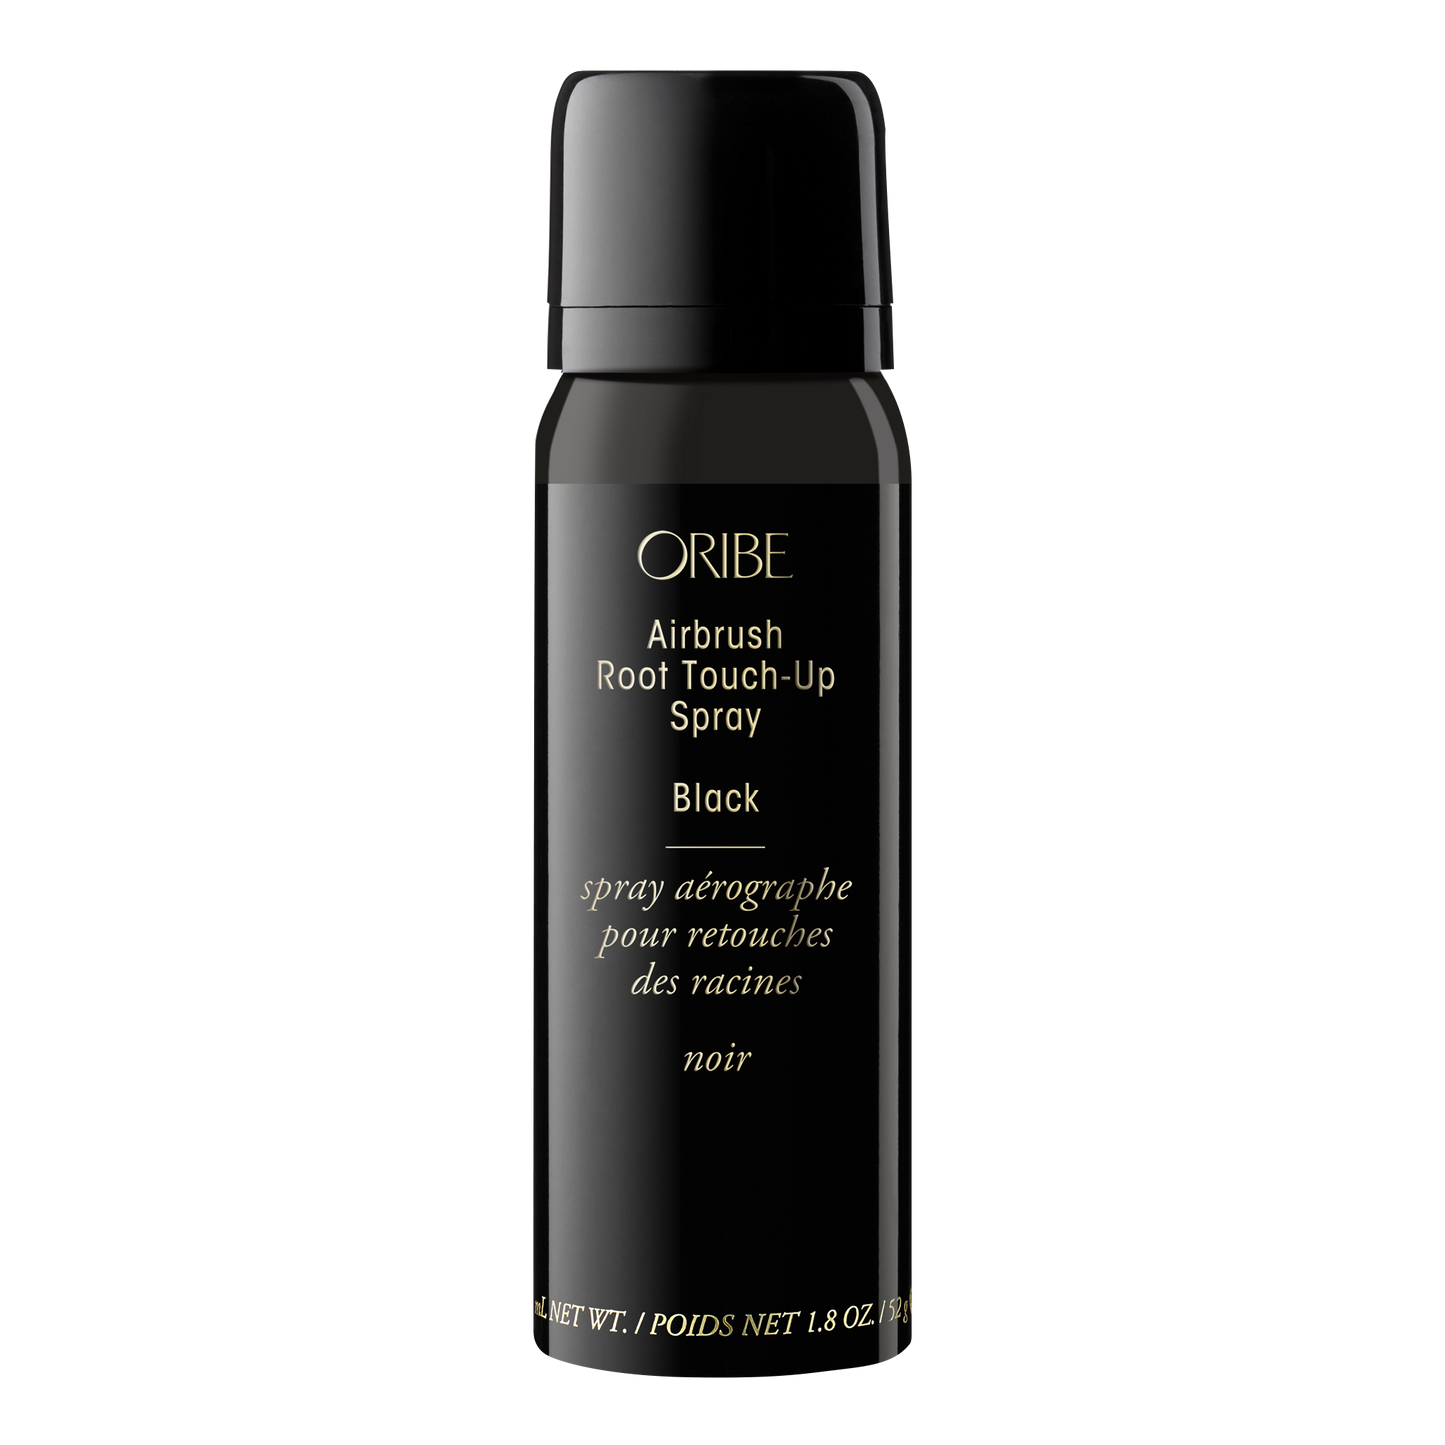 Airbrush Root Touch-Up Spray - Black 75mL